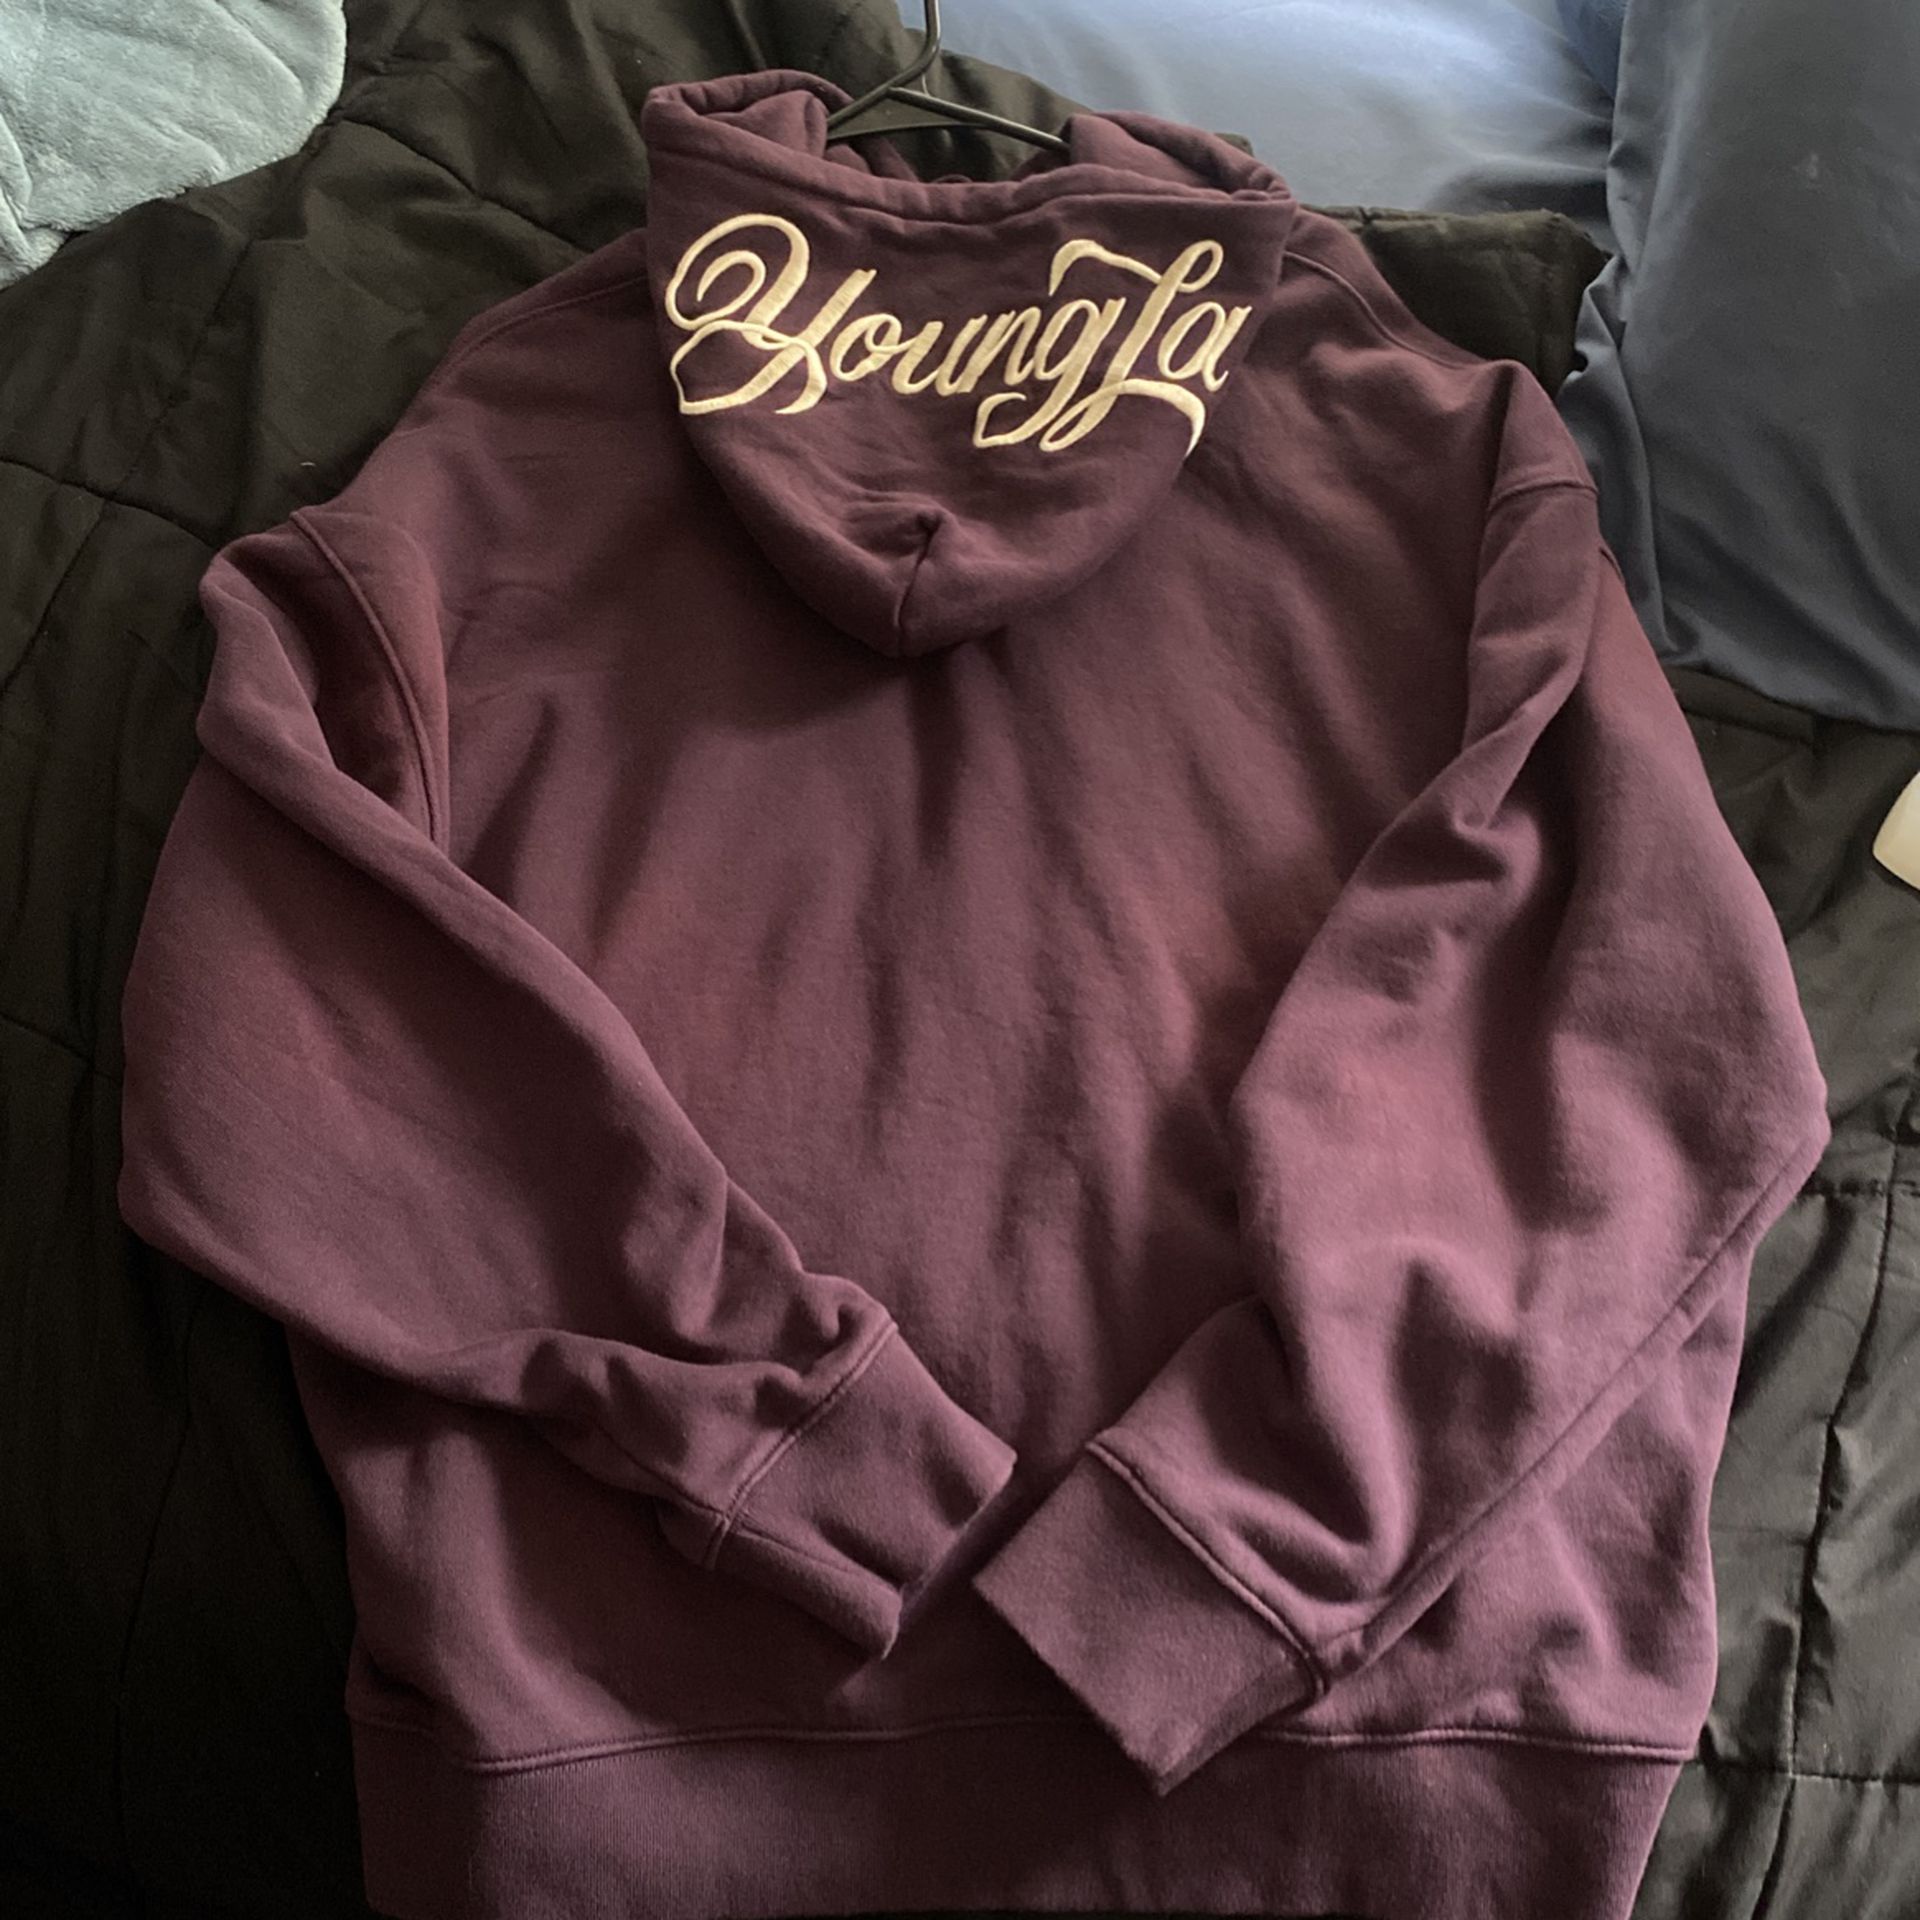 youngla Hoodie for Sale in Anaheim, CA - OfferUp